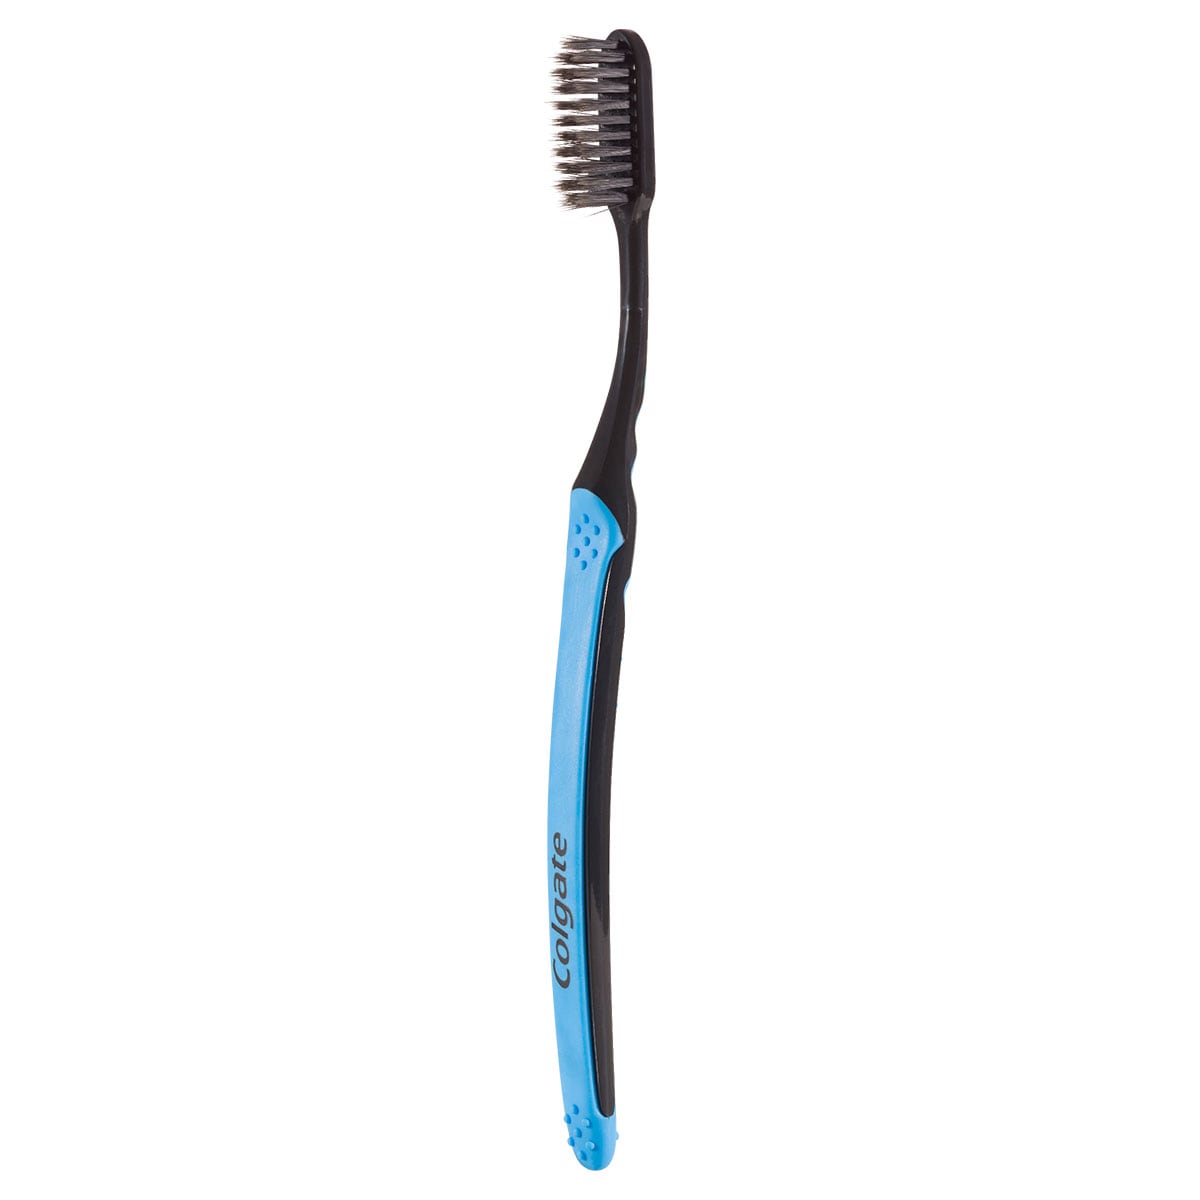 Colgate SlimSoft Charcoal Toothbrush 1 Pack